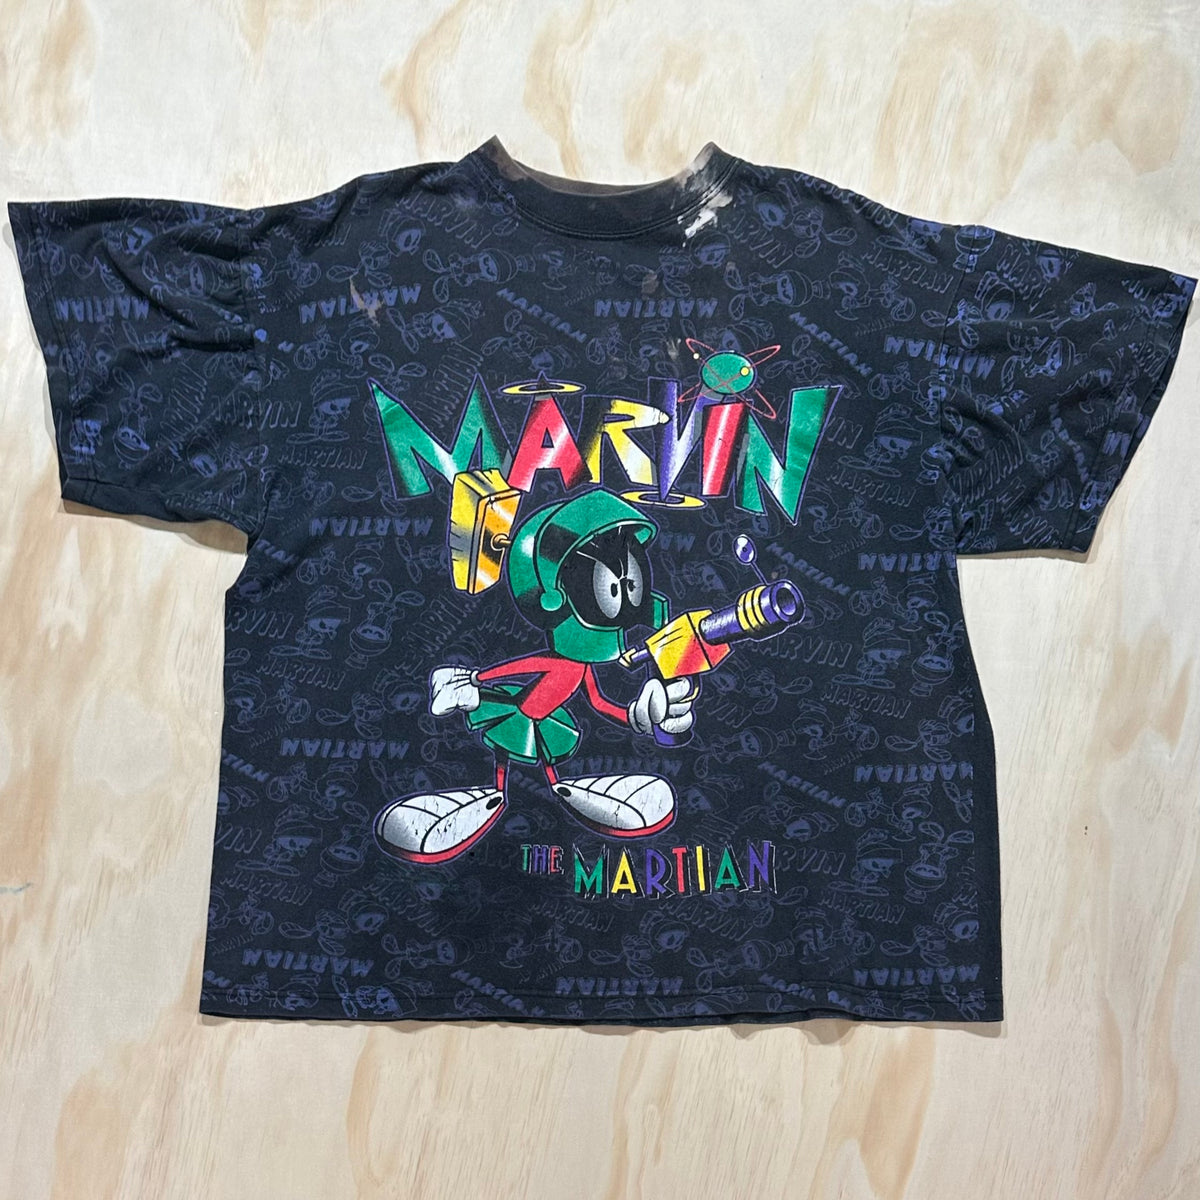 1995 Vintage Marvin The Martian Looney Tunes shirt